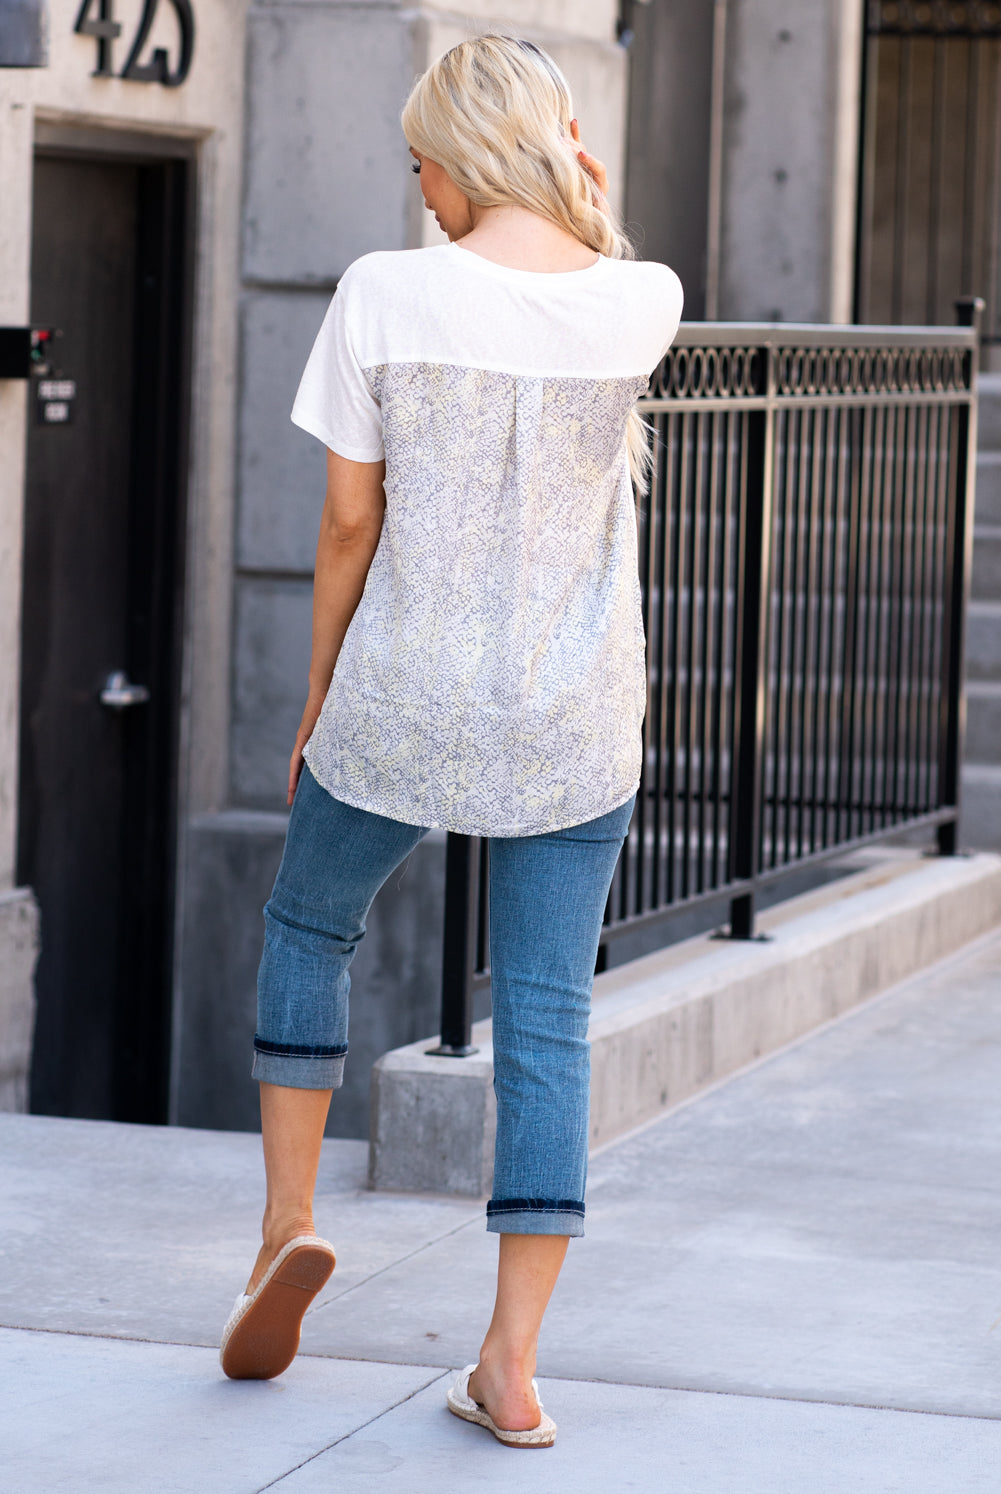 Mystree  This snake skin printed top will add a fresh print to your already overfilled boutique closet.   Collection: Spring 2021 Color: Off White Neckline: Round Sleeve: Short Sleeves 75% Viscose, 25% Polyester Style #: 19041-OffWhite Contact us for any additional measurements or sizing.